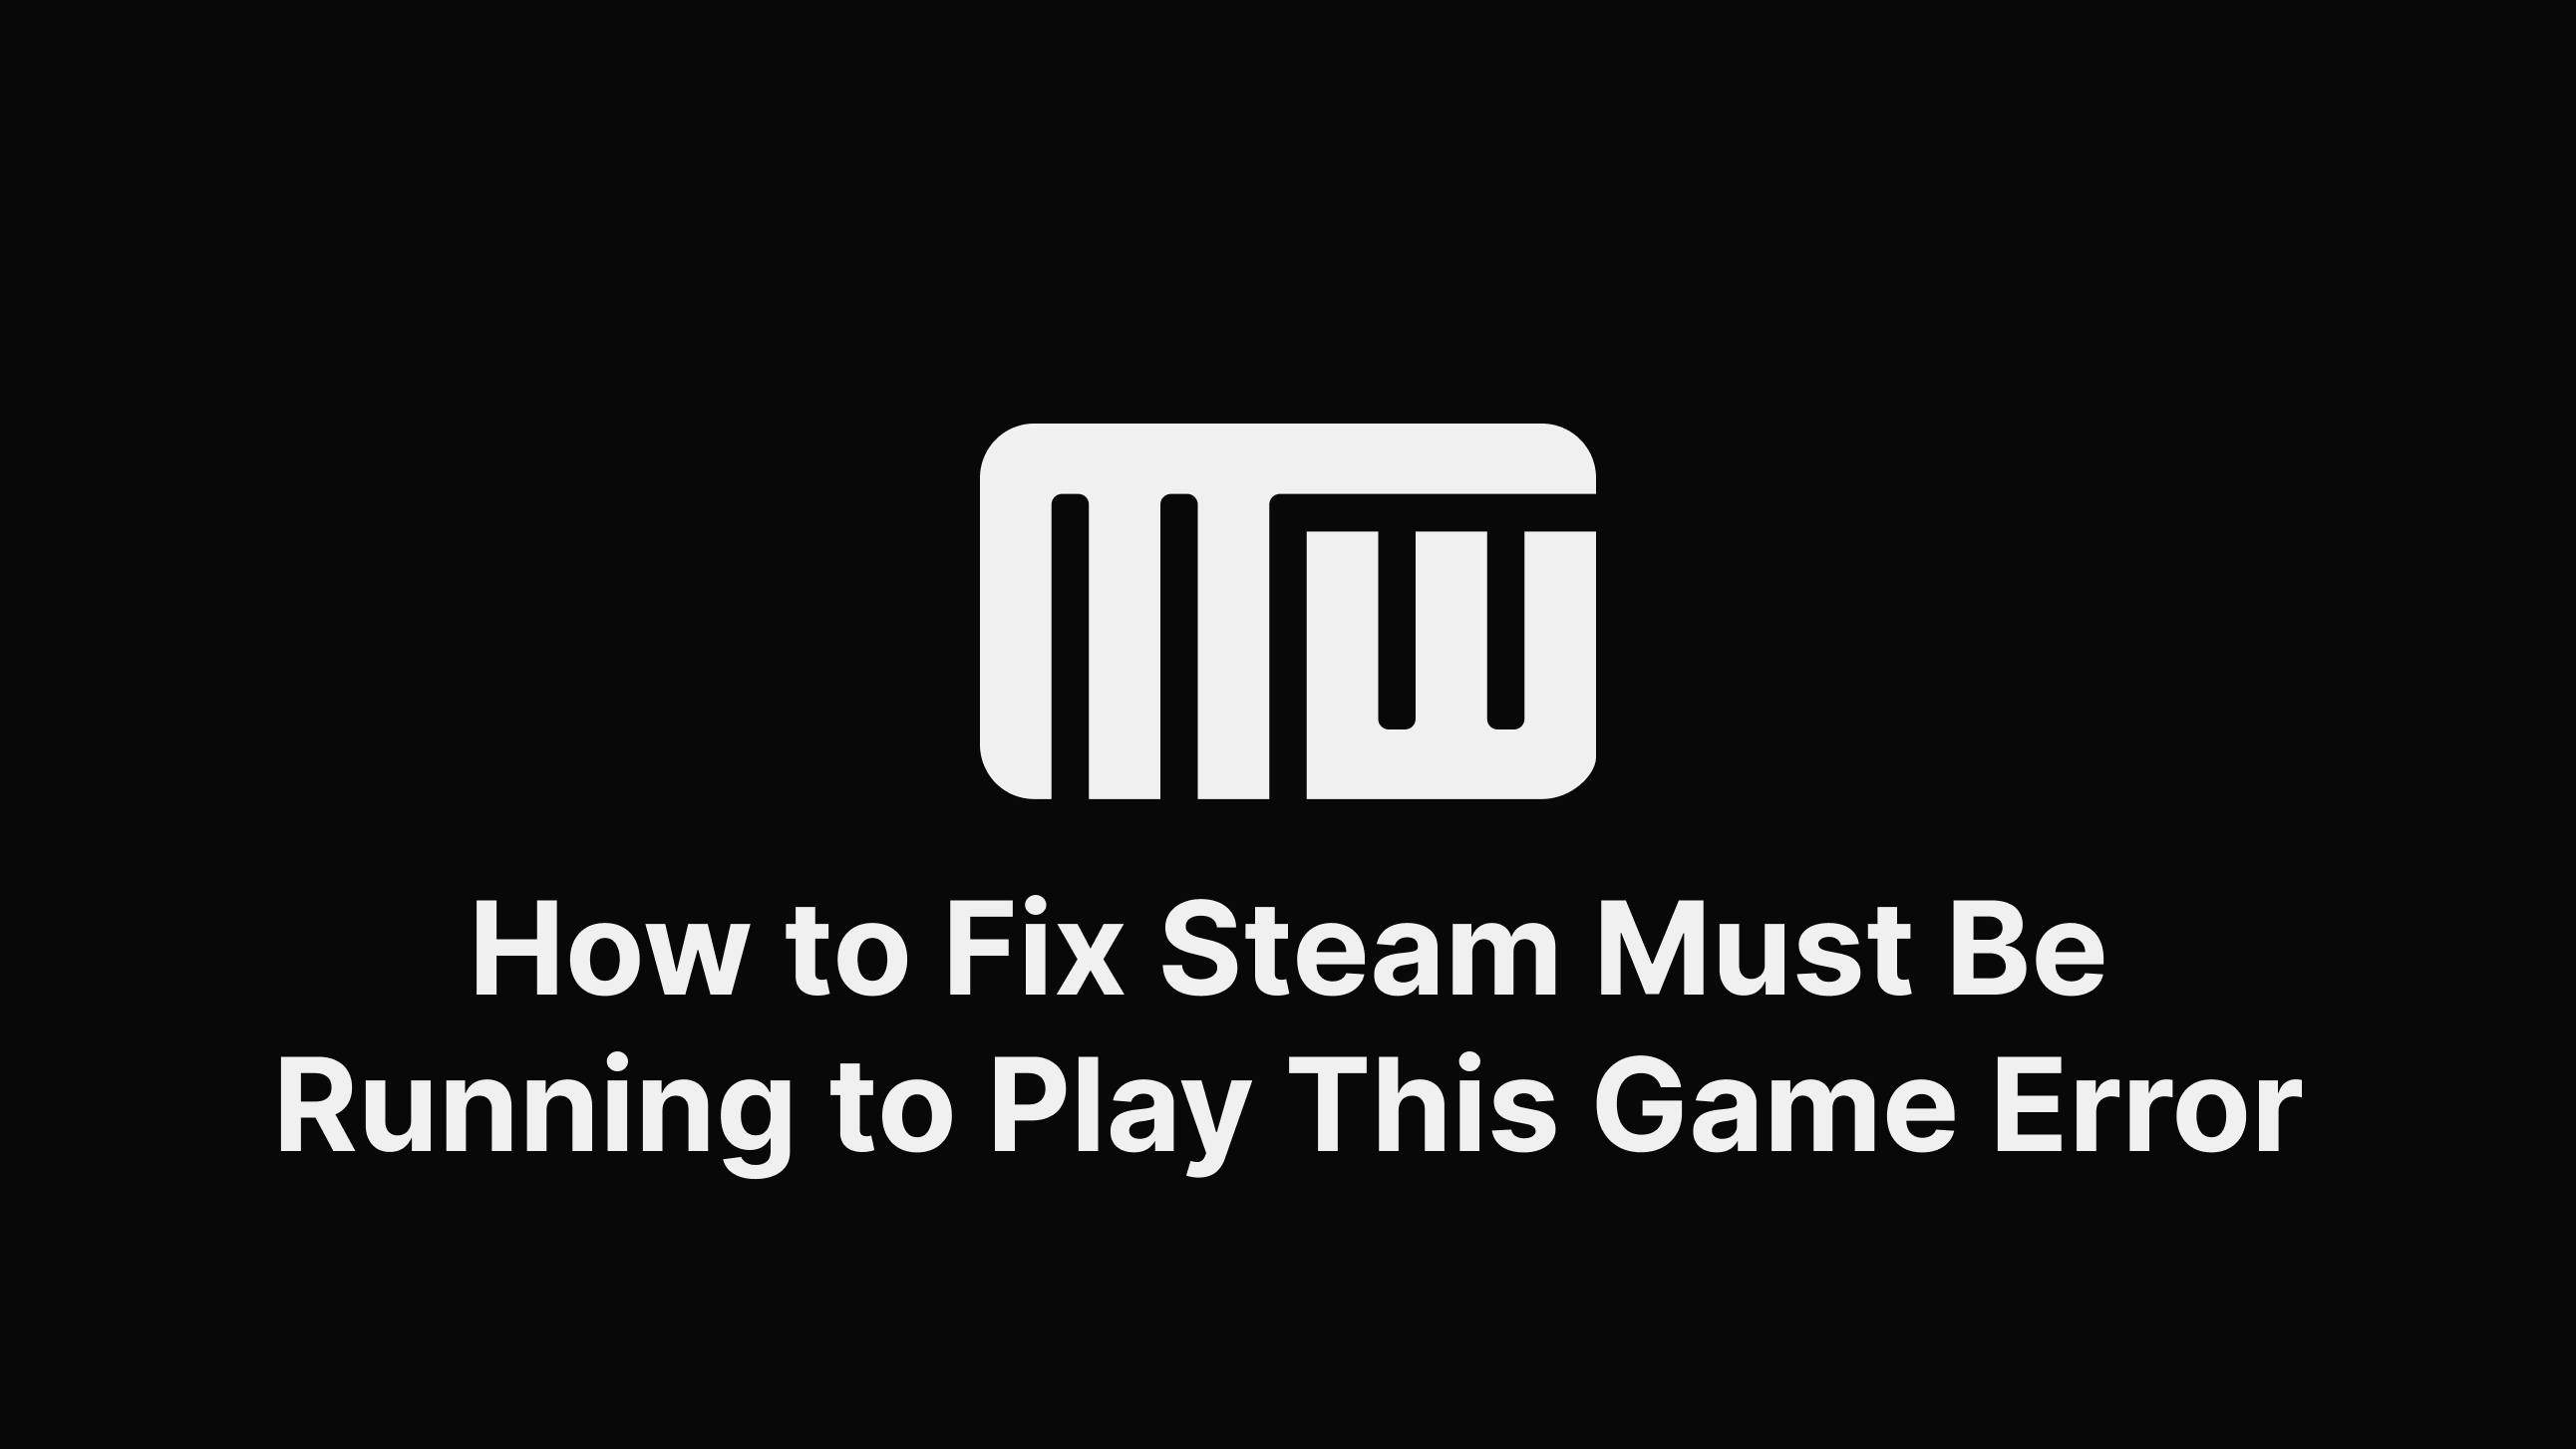 How To Fix Steam Must Be Running to Play This Game - Easy Fix! 